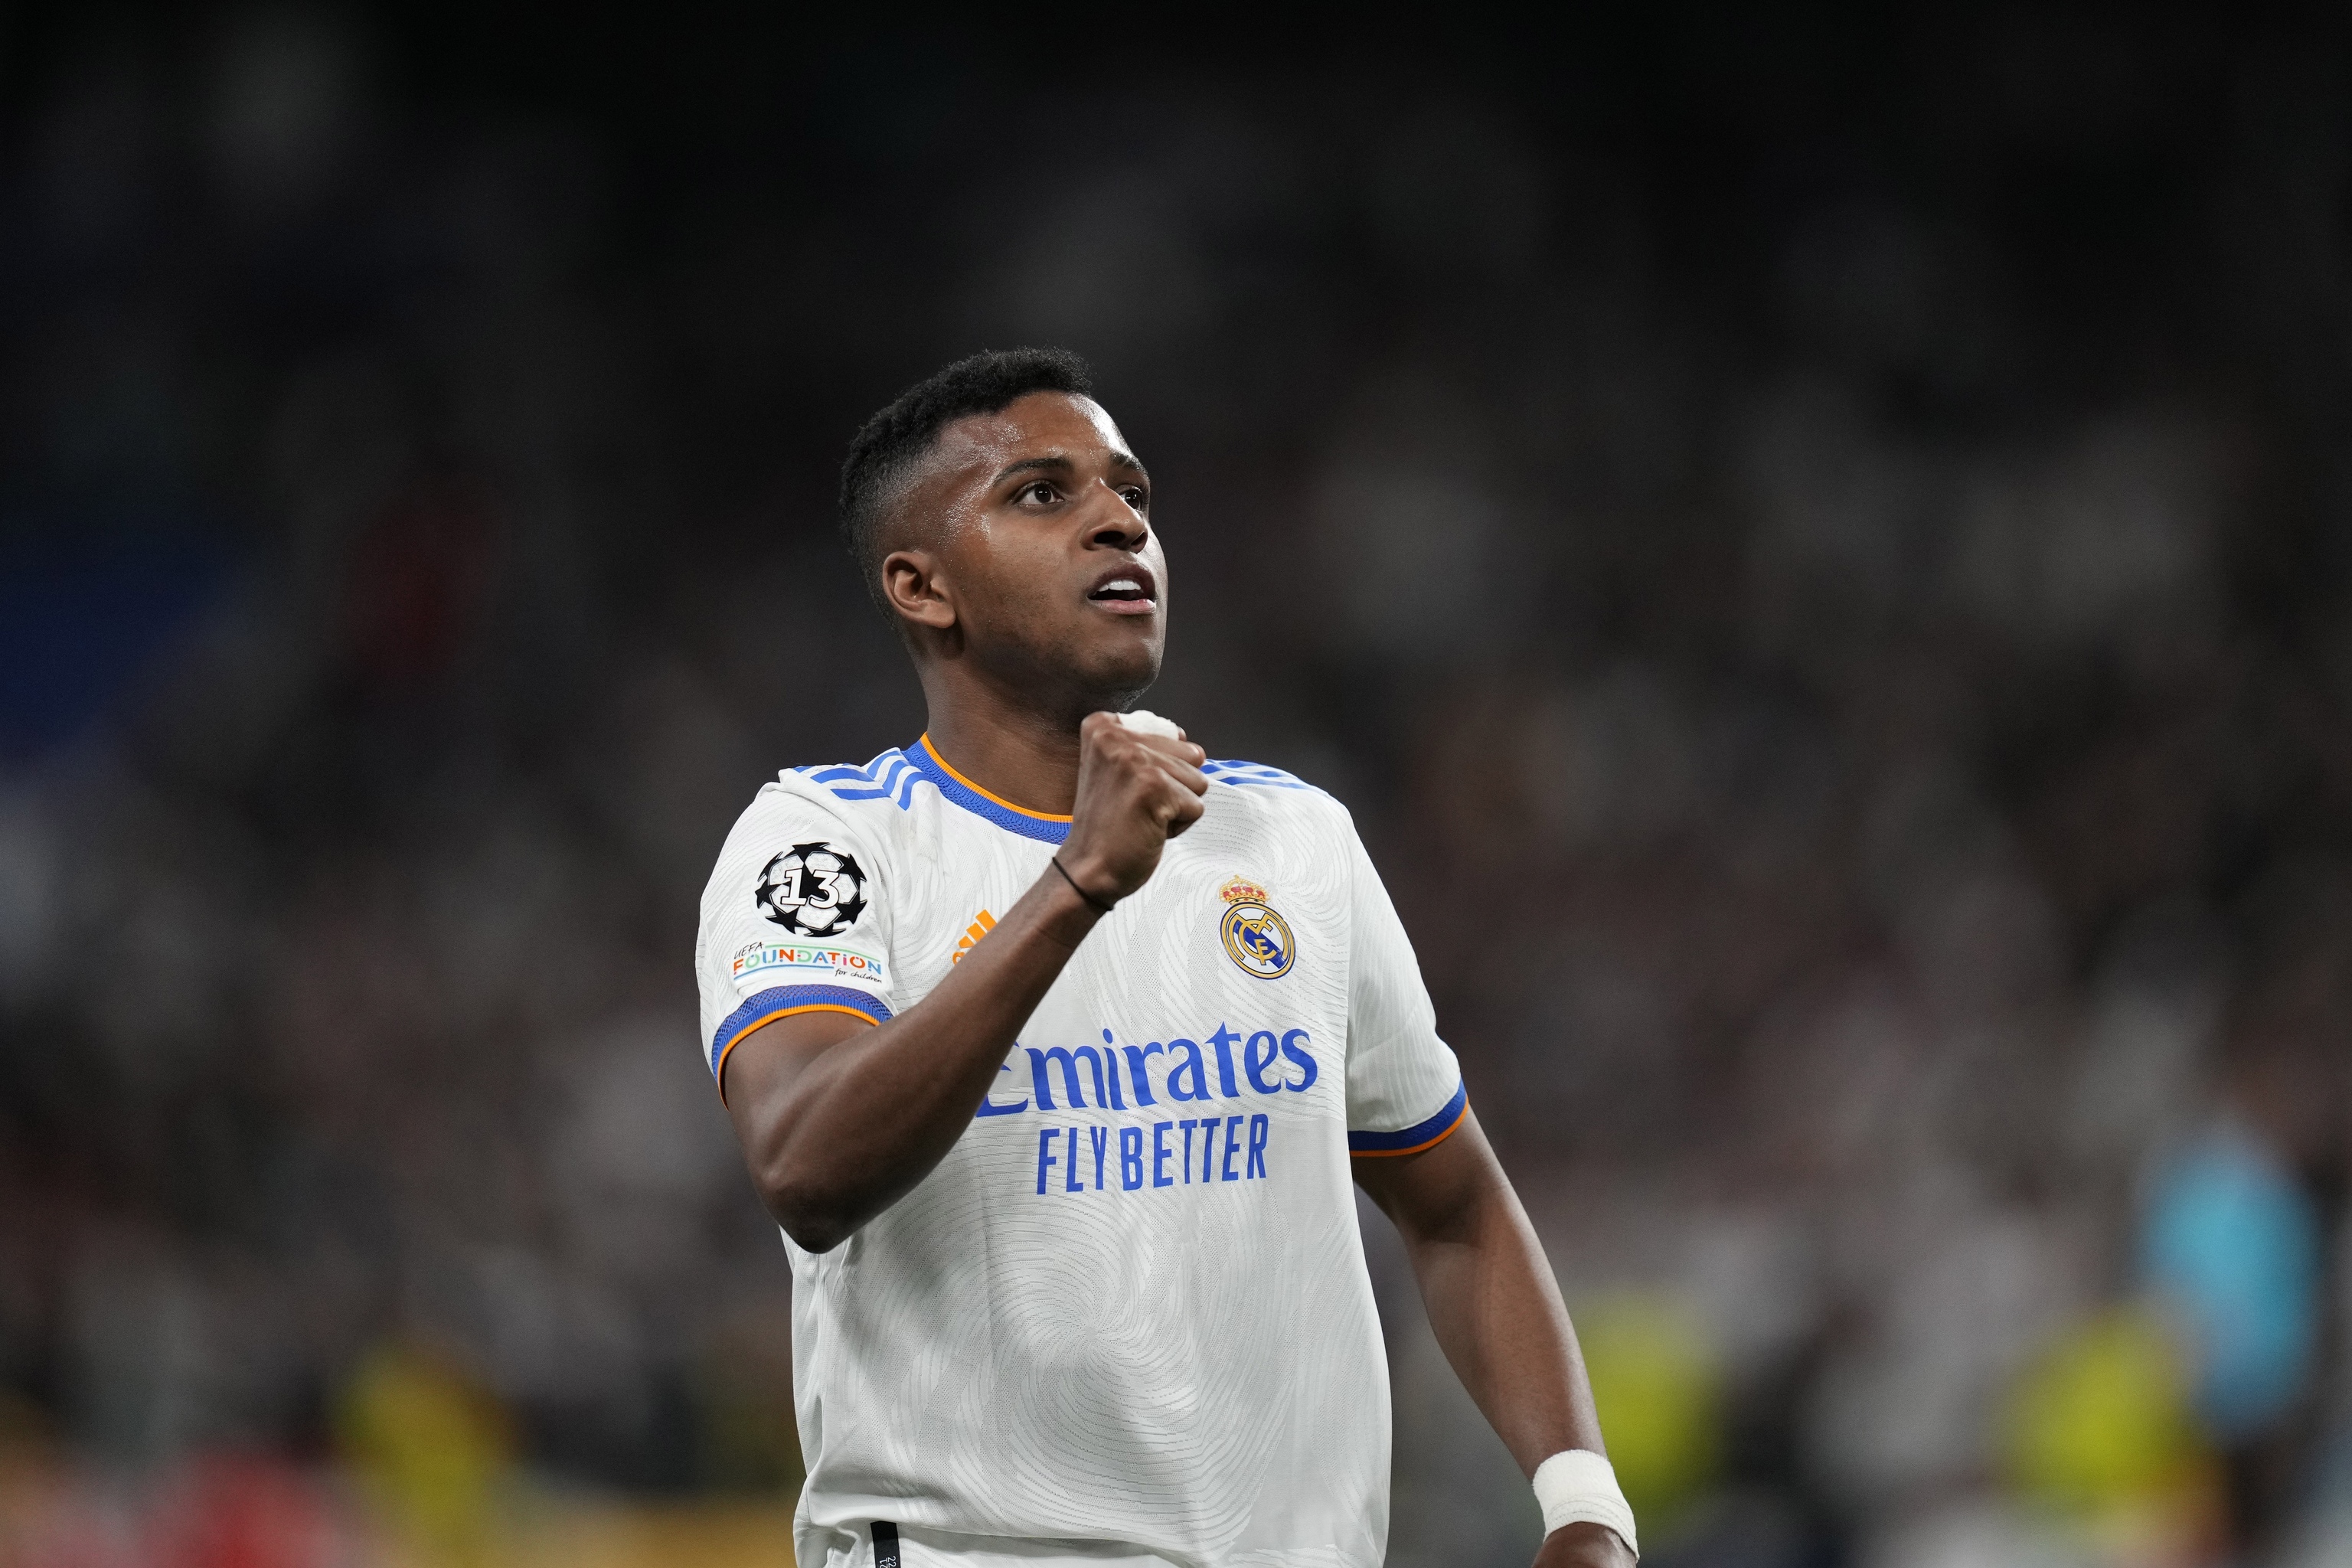 lt;HIT gt;Real lt;/HIT gt;  lt;HIT gt;Madrid lt;/HIT gt;'s Rodrygo celebrates his side's first goal during the Champions League semi final, second leg, soccer match between  lt;HIT gt;Real lt;/HIT gt;  lt;HIT gt;Madrid lt;/HIT gt; and Manchester City at the Santiago Bernabeu stadium in  lt;HIT gt;Madrid lt;/HIT gt;, Spain, Wednesday, May 4, 2022. (AP Photo/Bernat Armangue)